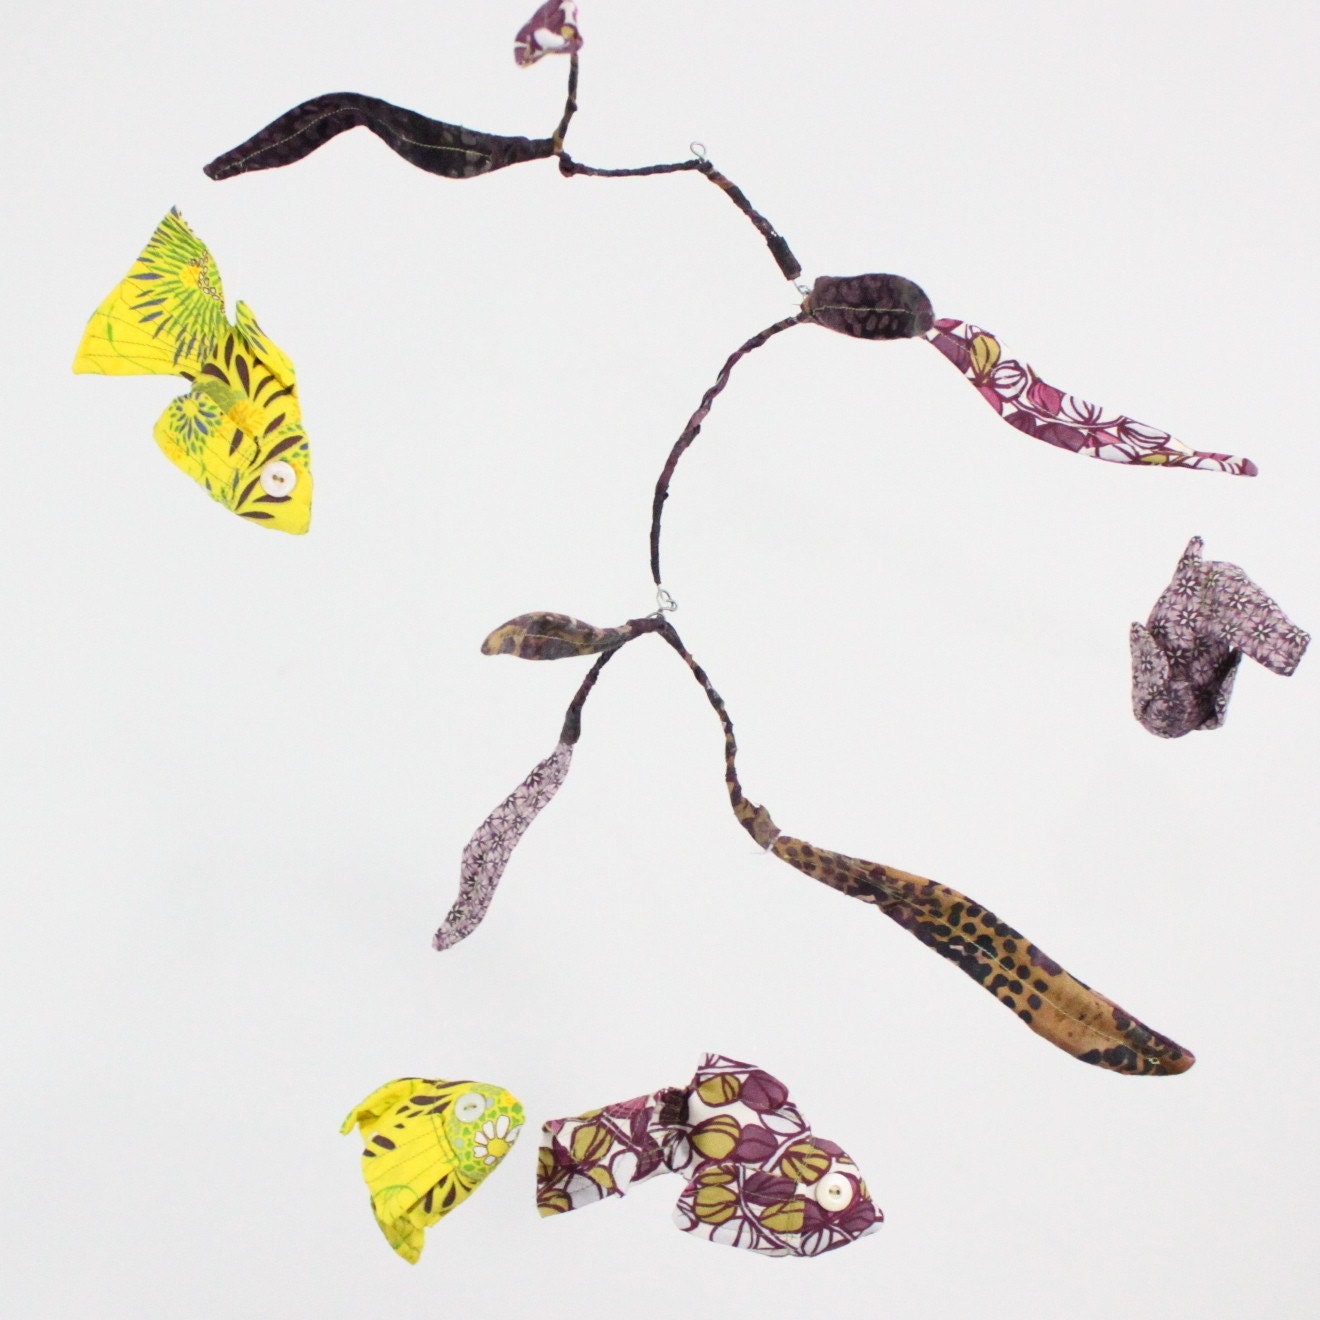 4 Goldfish swim along merrily - fabric mobile in lemon yellow,  amethyst purple, ink black, white and a touch of spring green